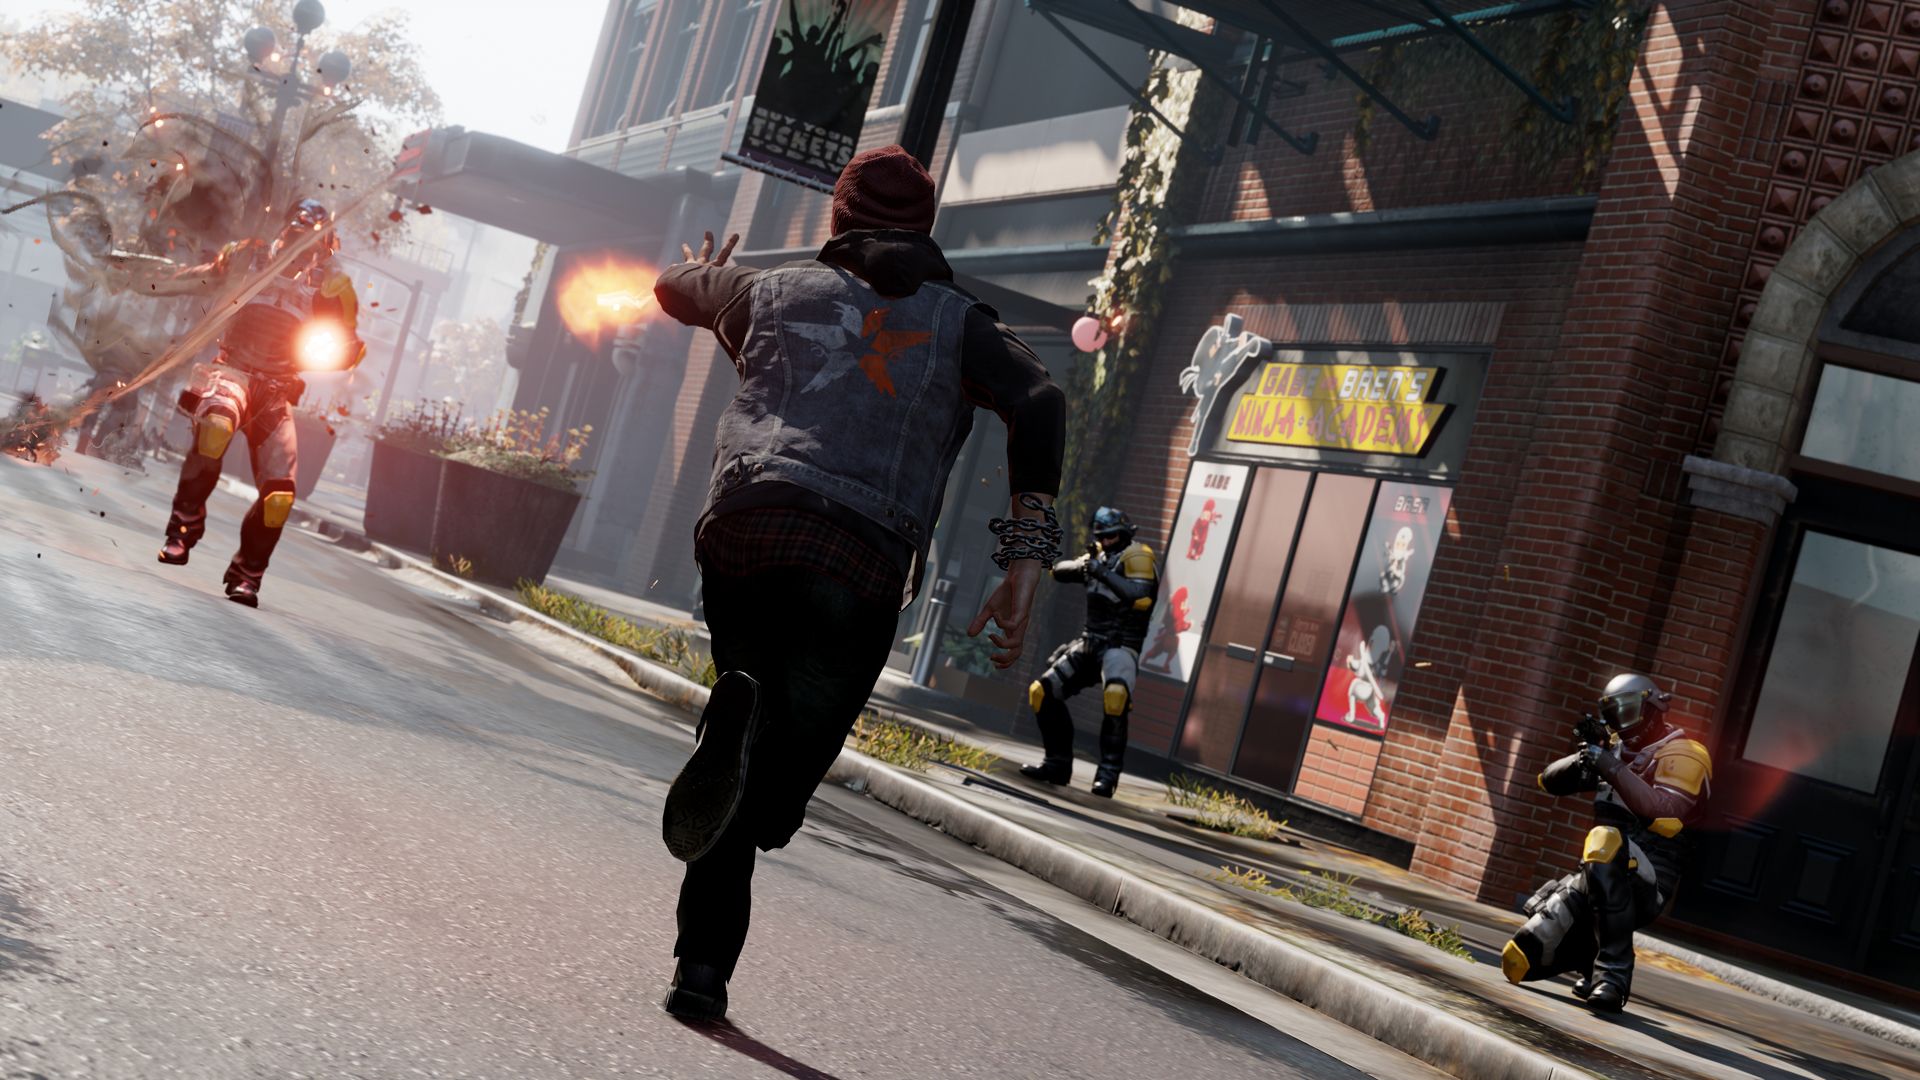 Infamous second son gameplay 1080p torrent downtown run download torent gta